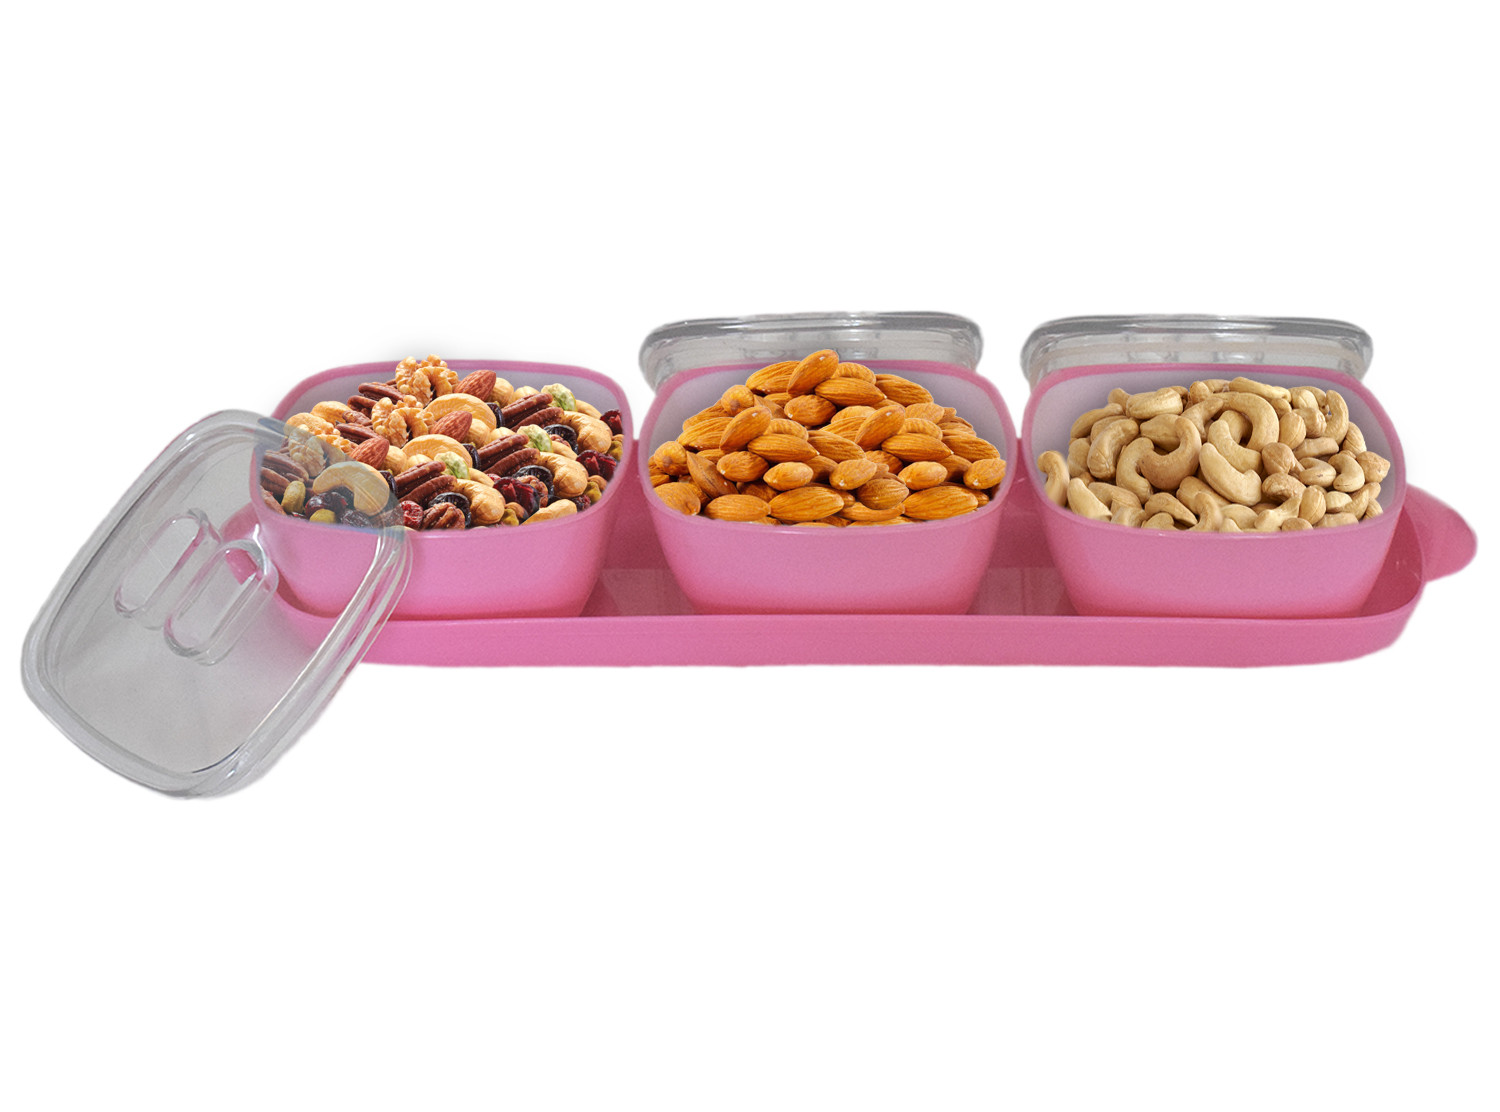 Kuber Industries Plastic 3 Bowls & 1 Tray Set For Serving & Store Dry Fruits, candies, Snacks With Silicon Rubberized Ring Lid (Pink)